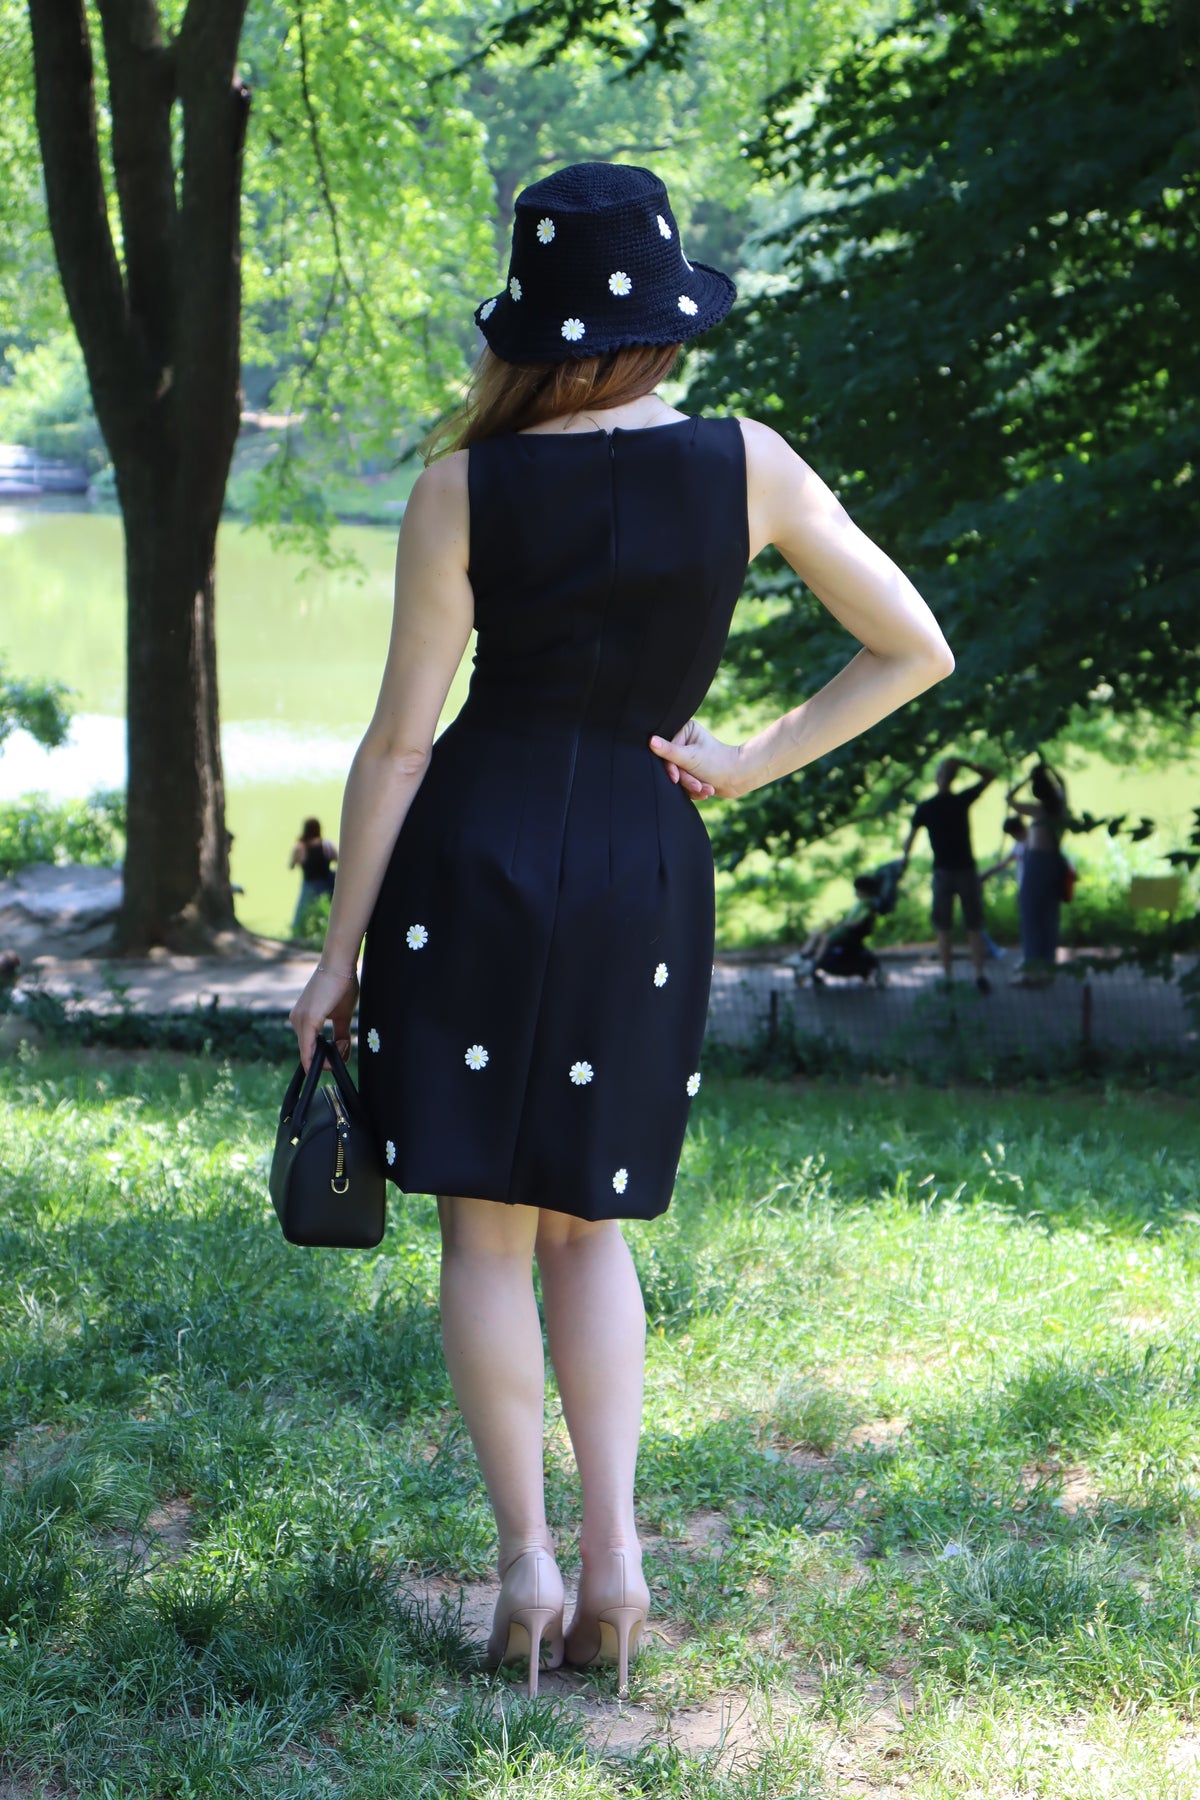 Back view of model in a black dress with white daisy appliques standing in front of a tree and a lake.